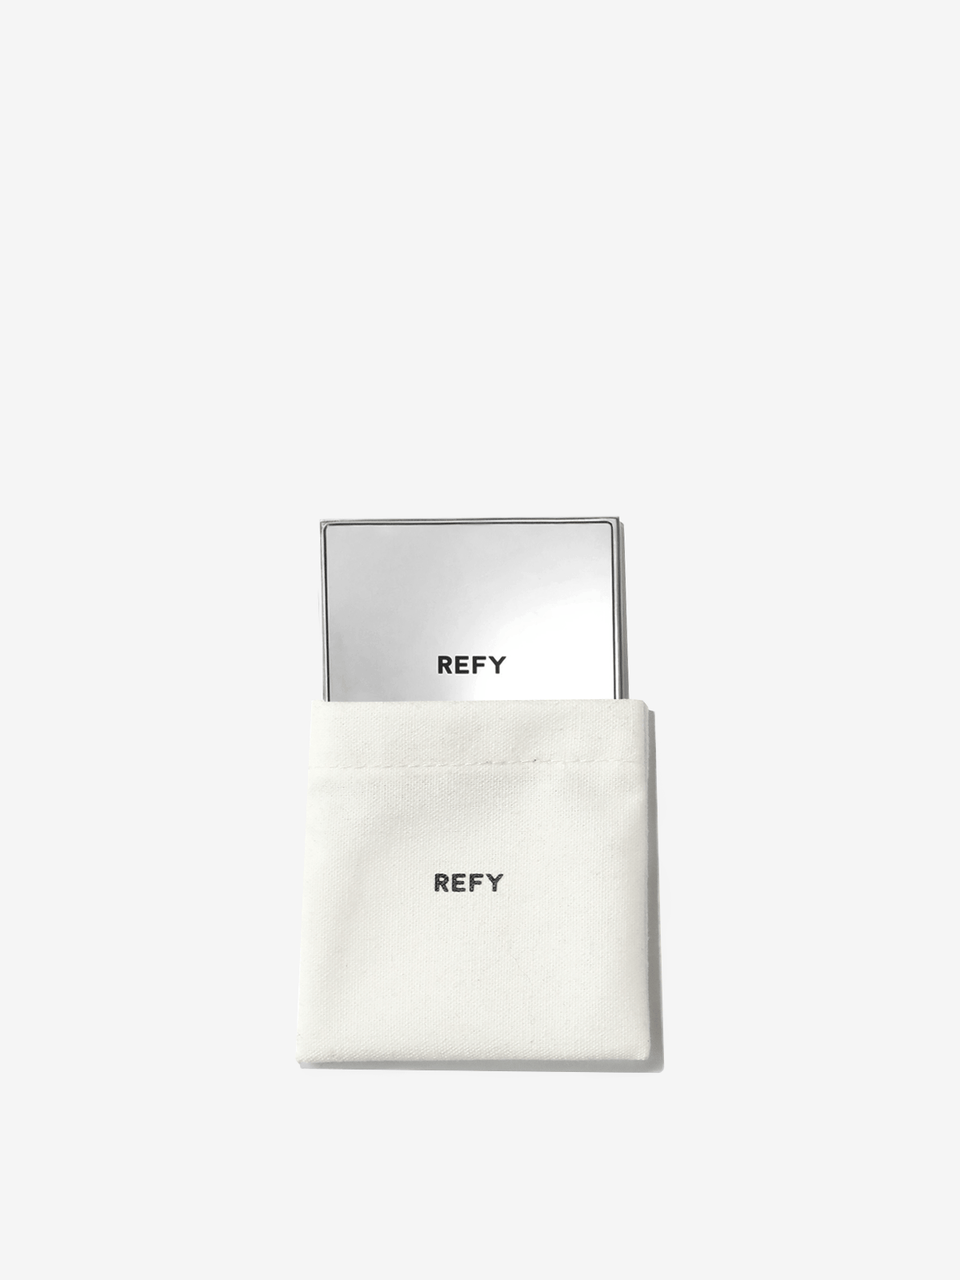 FRONT IMAGE OF REFY COMPACT MIRROR